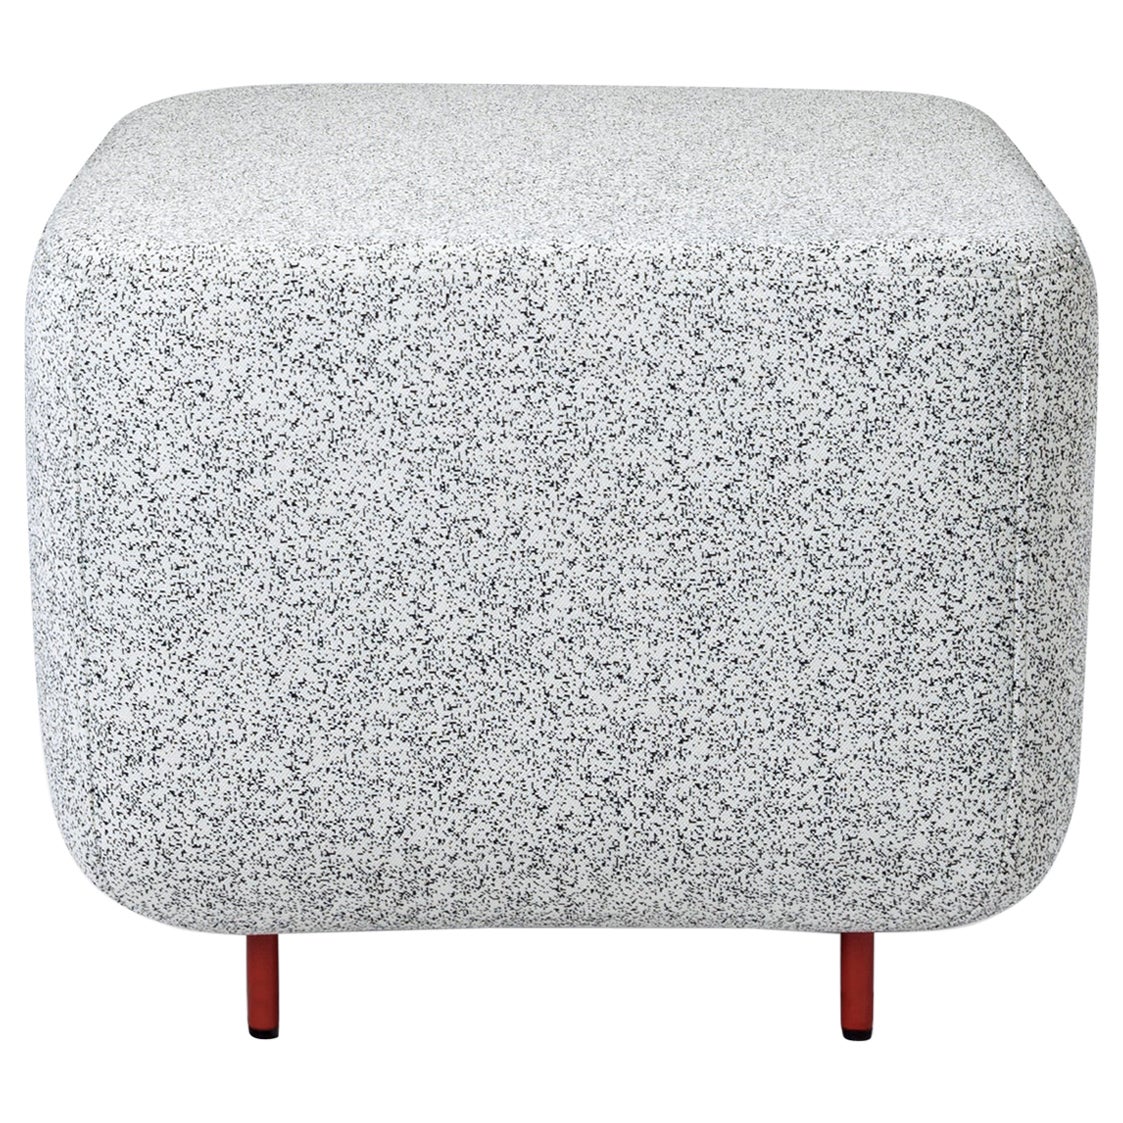 Petite Friture Small Hoff Stool in Grey by Morten & Jonas, 2015 For Sale